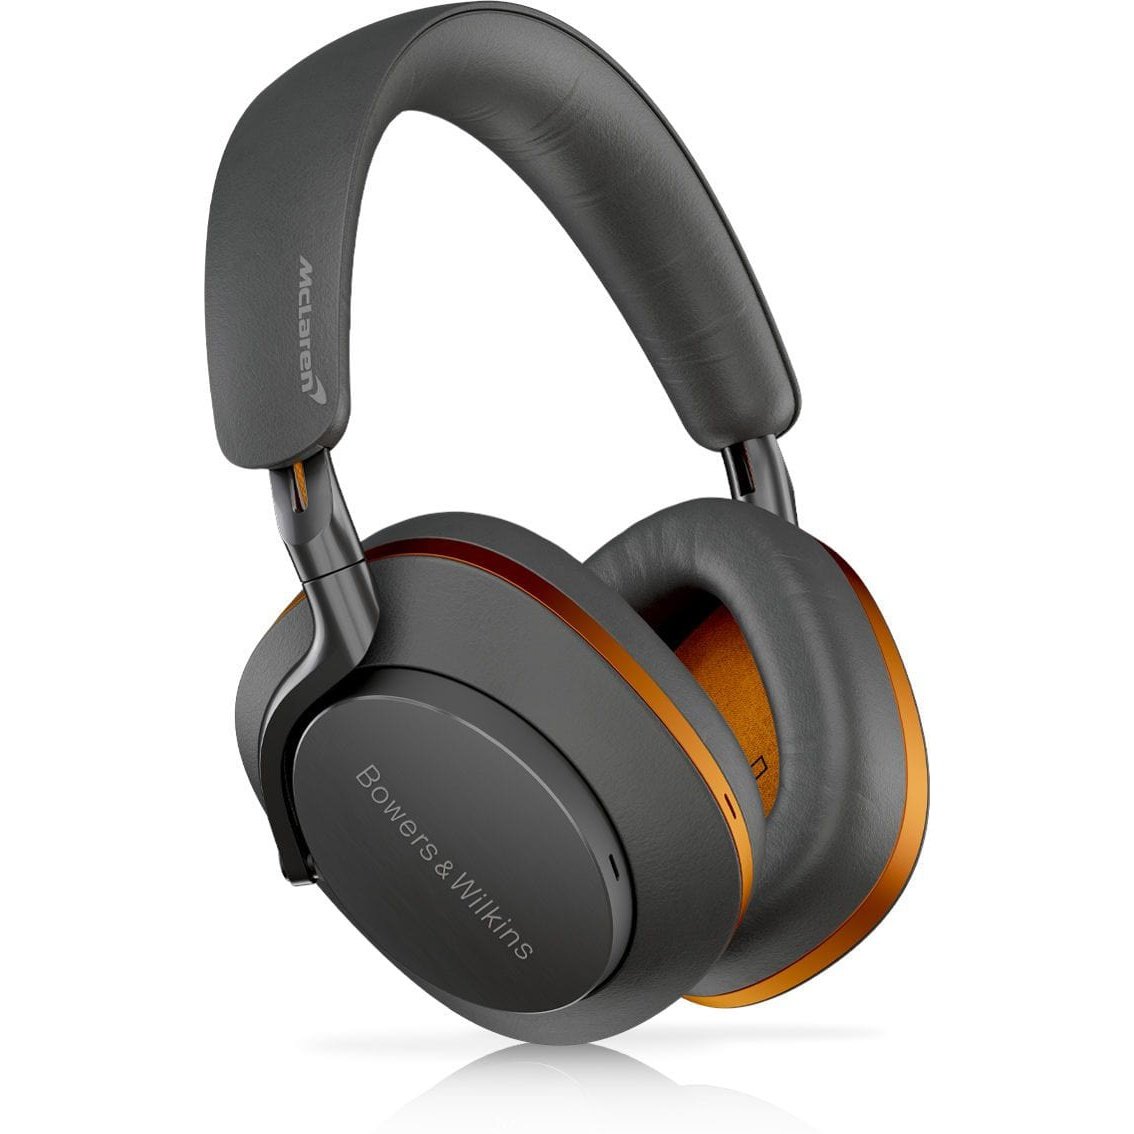 Bowers & Wilkins Bowers & Wilkins PX8 McLaren Edition Luxury Noise Cancelling Headphones Headphones and Accessories